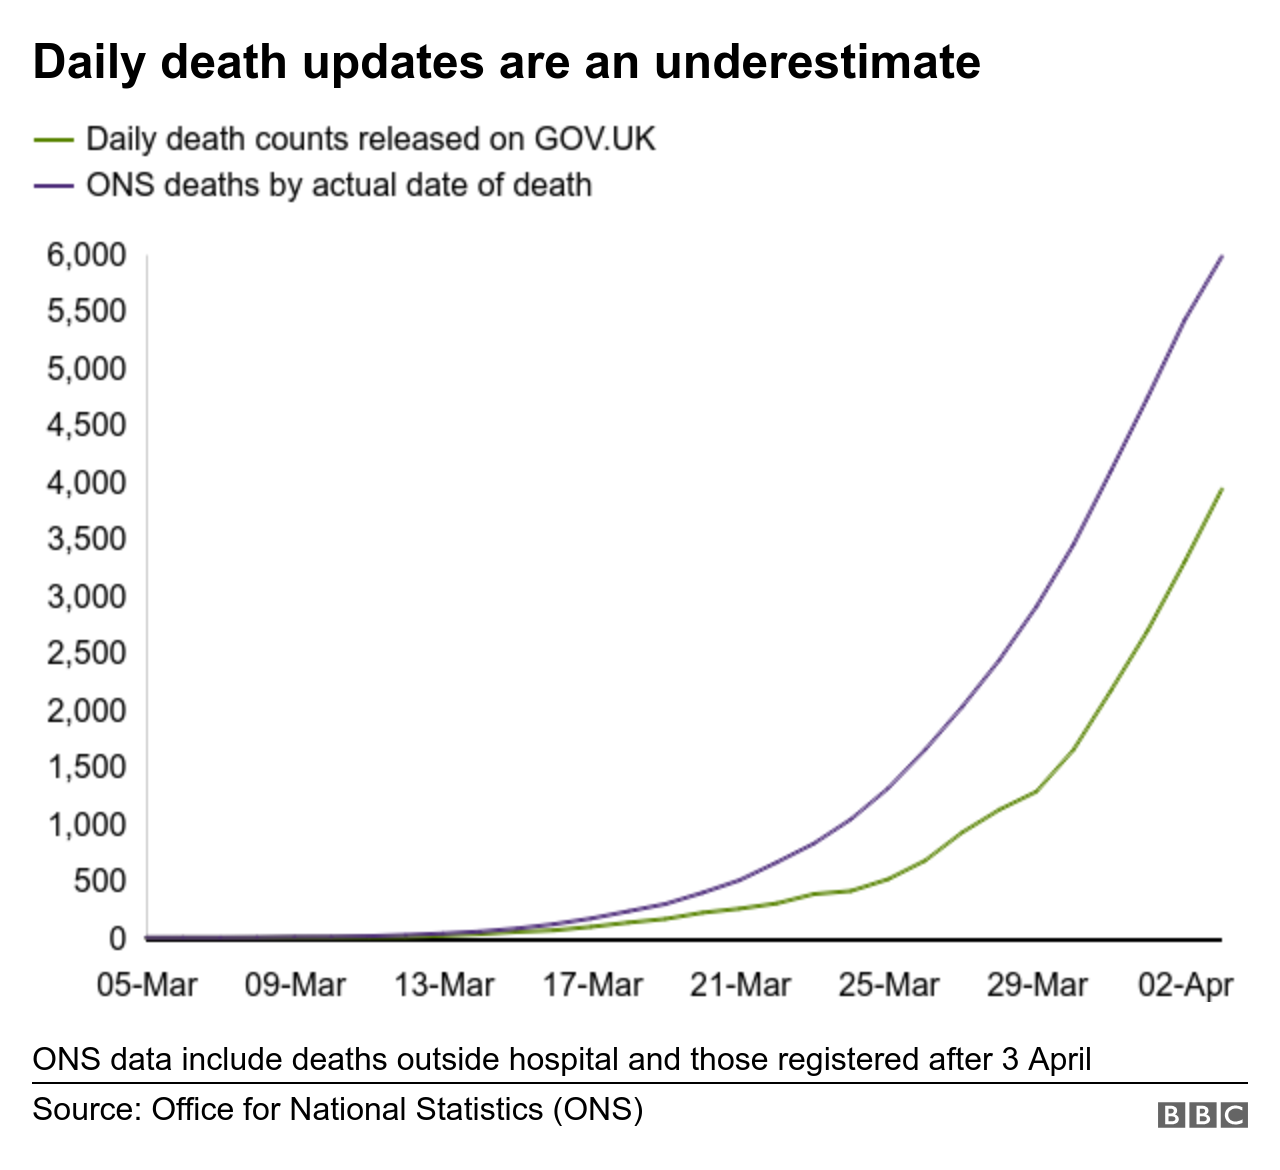 daily death updates are an underestimate since they exclude deaths outside hospital and are subject to reporting delays